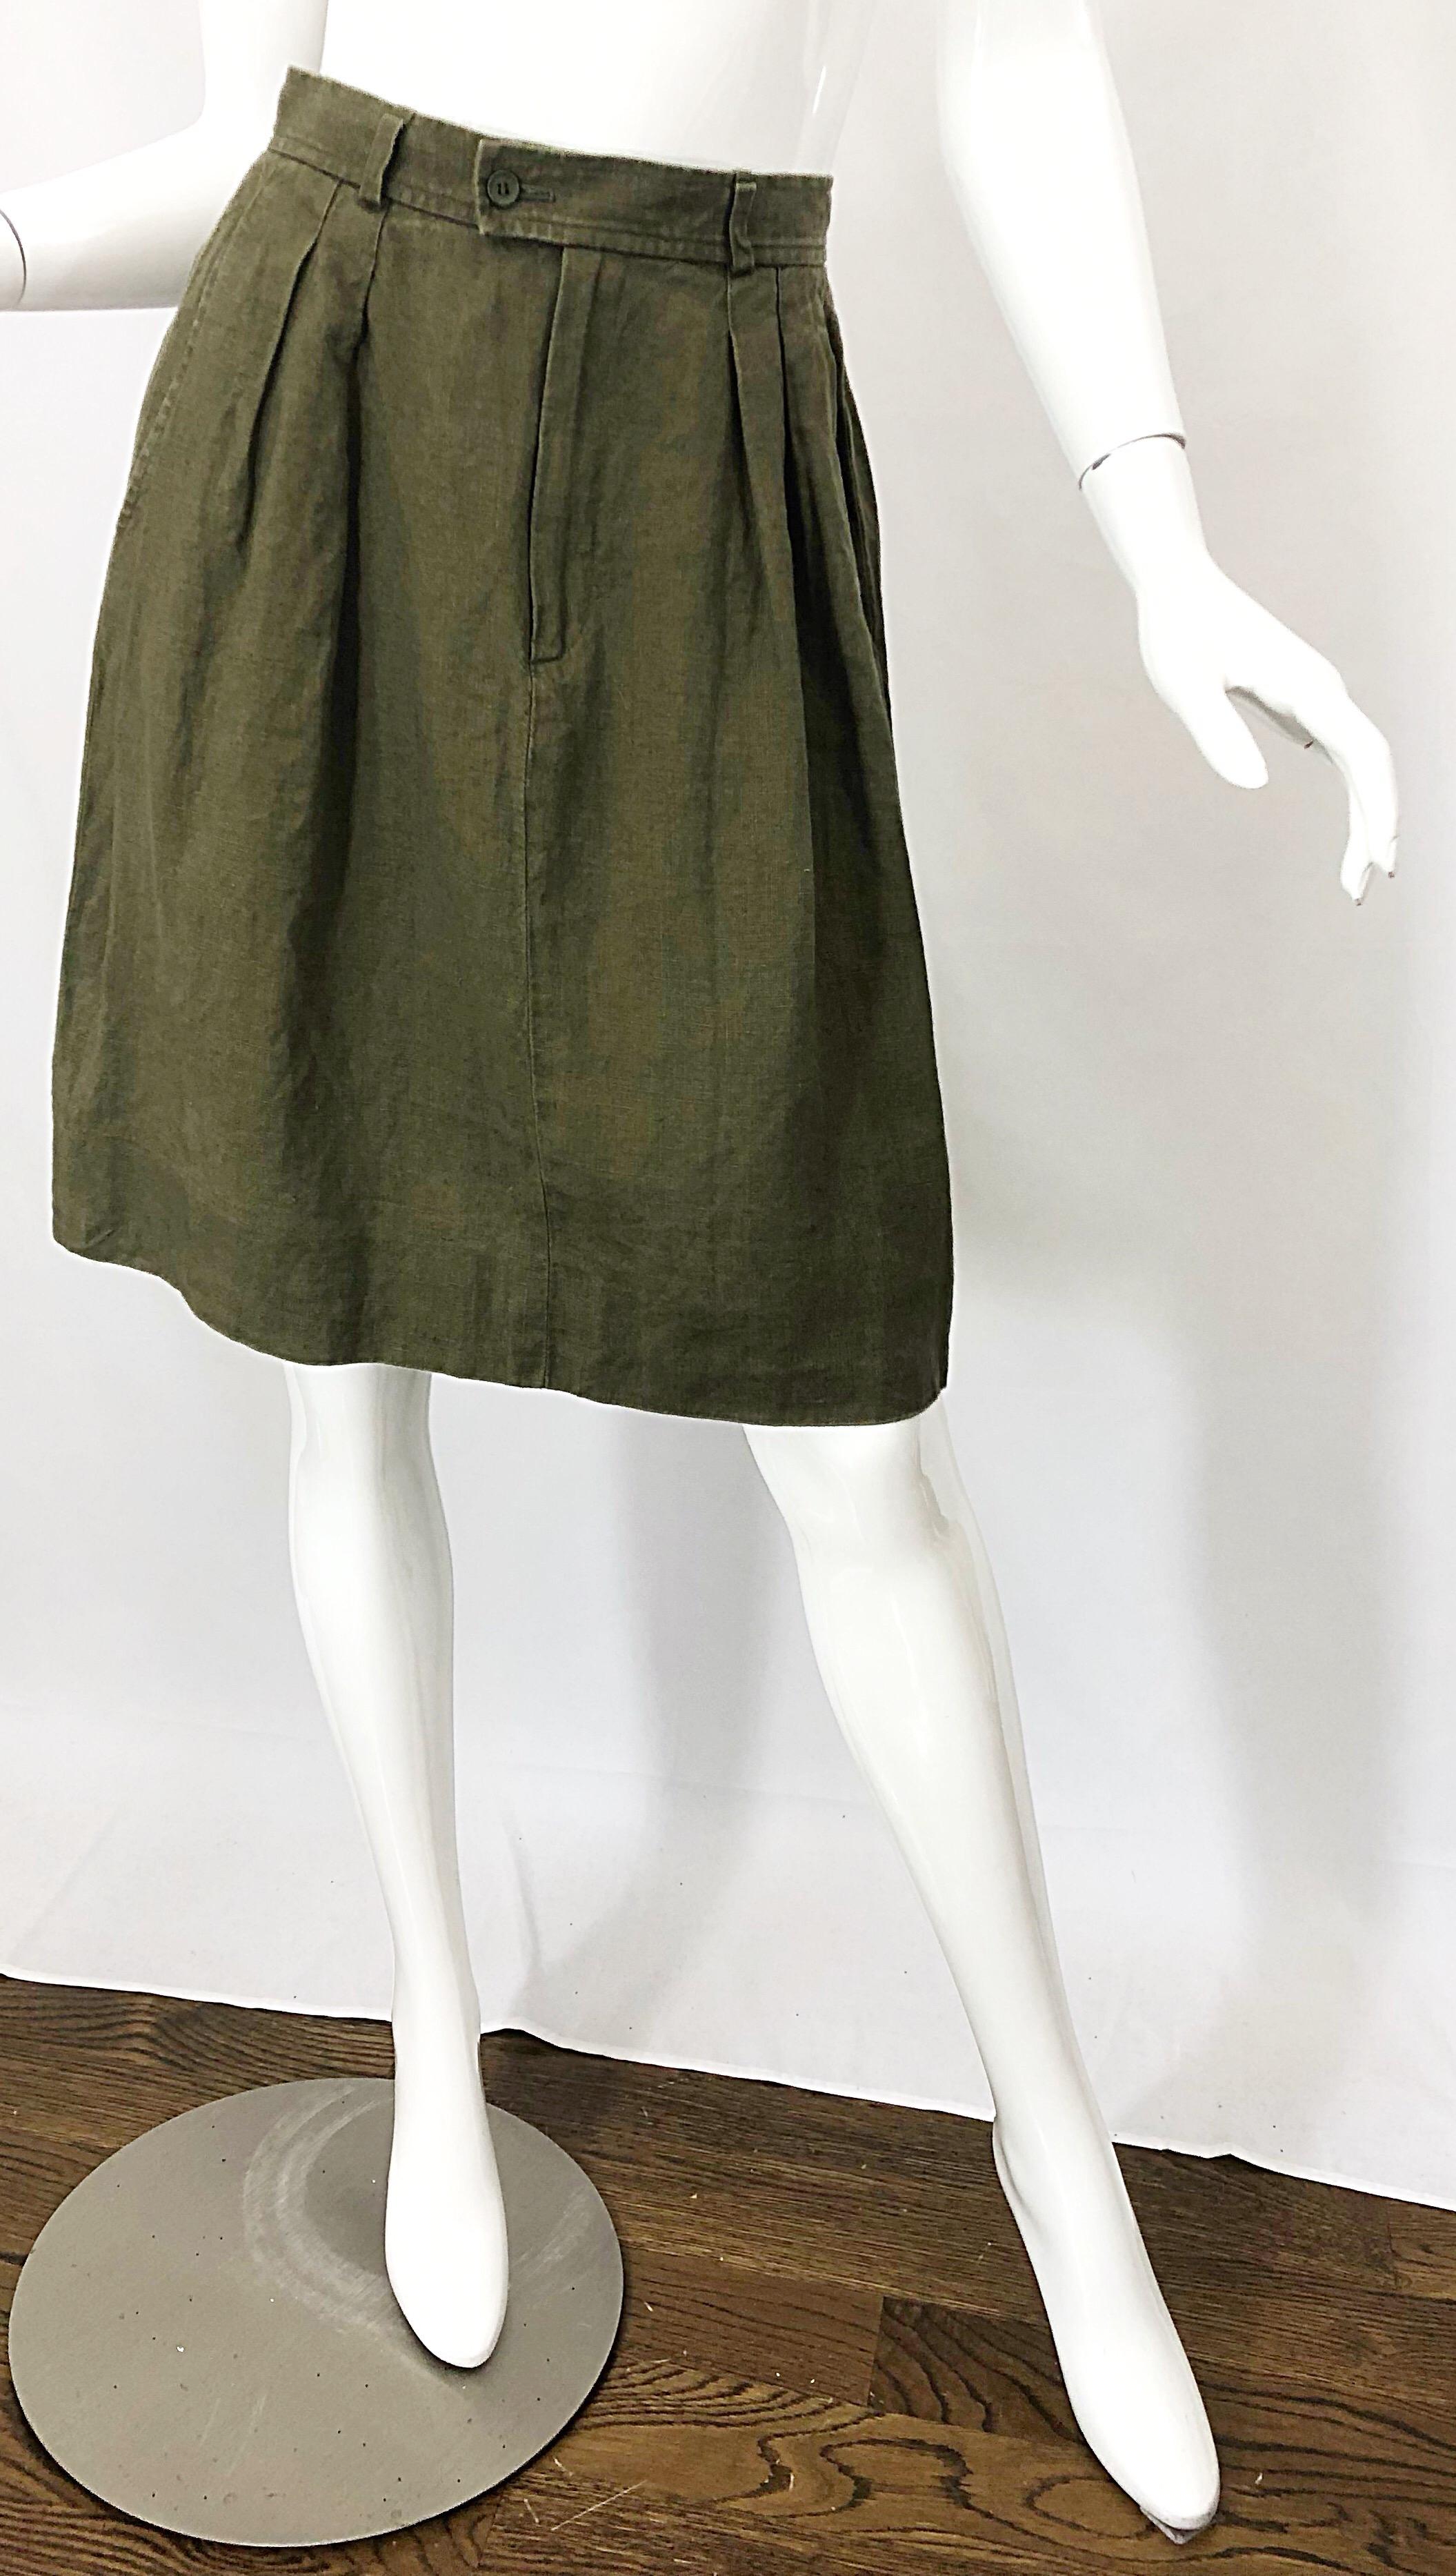 1990s YVES SAINT LAURENT YSL Rive Gauche army green linen skirt! Features the perfect color green that can easily be your new neutral. Super soft linen fabric. Flattering pleats at each side of the front waist. Button closure at waistband with